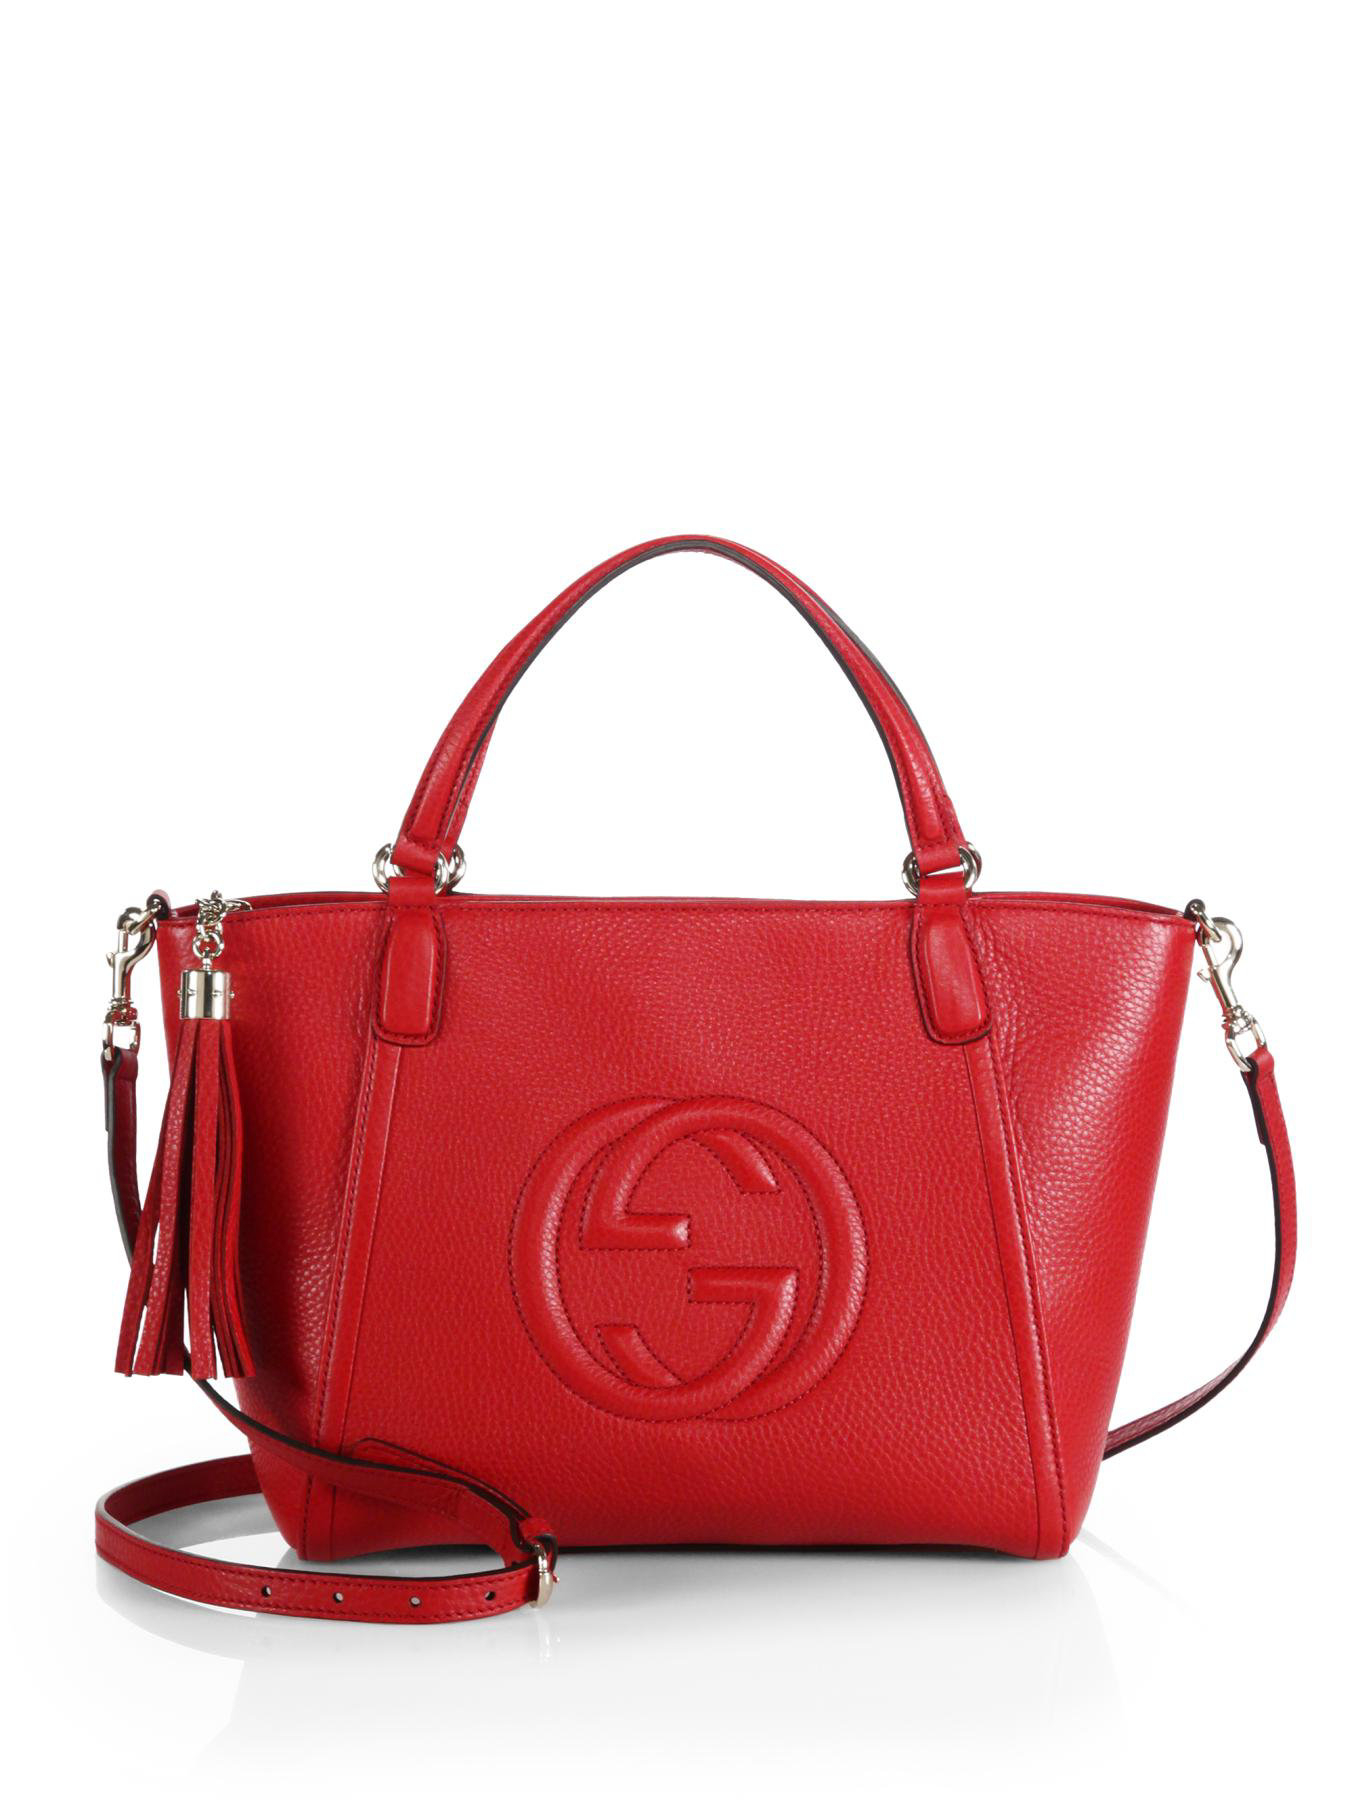 Lyst - Gucci Soho Small Leather Top Handle Bag in Red